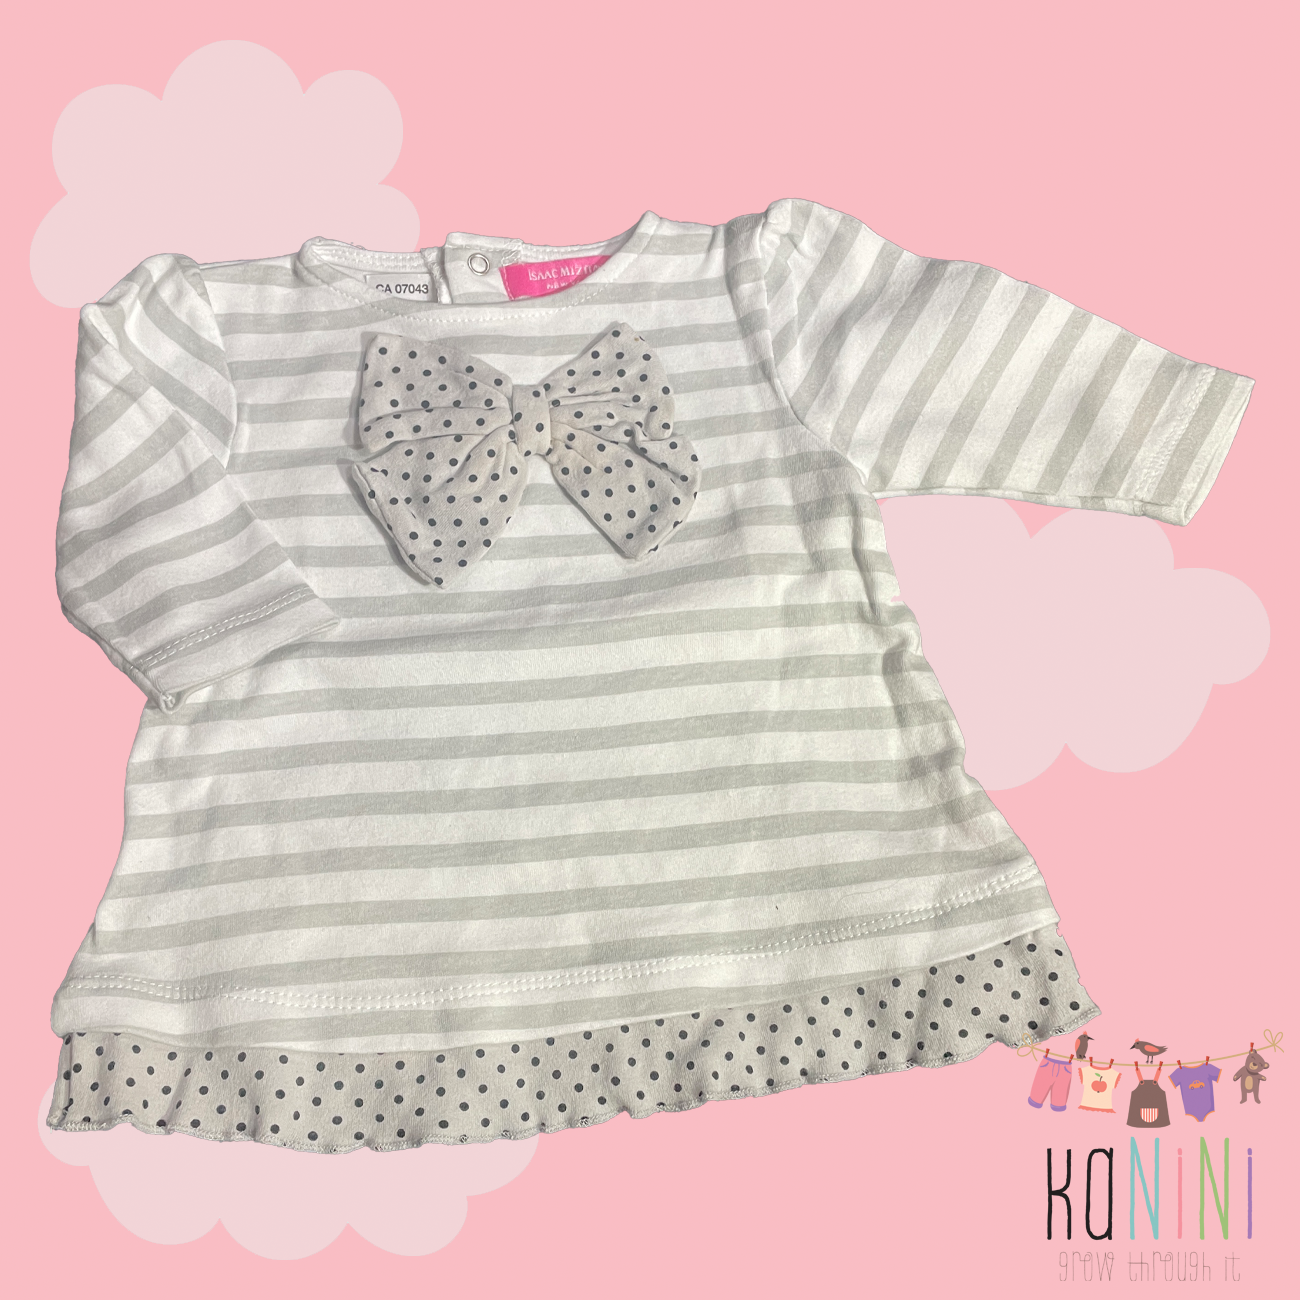 Featured image for “Isaac Mizrahi of New York 3 - 6 Months Girls Top”